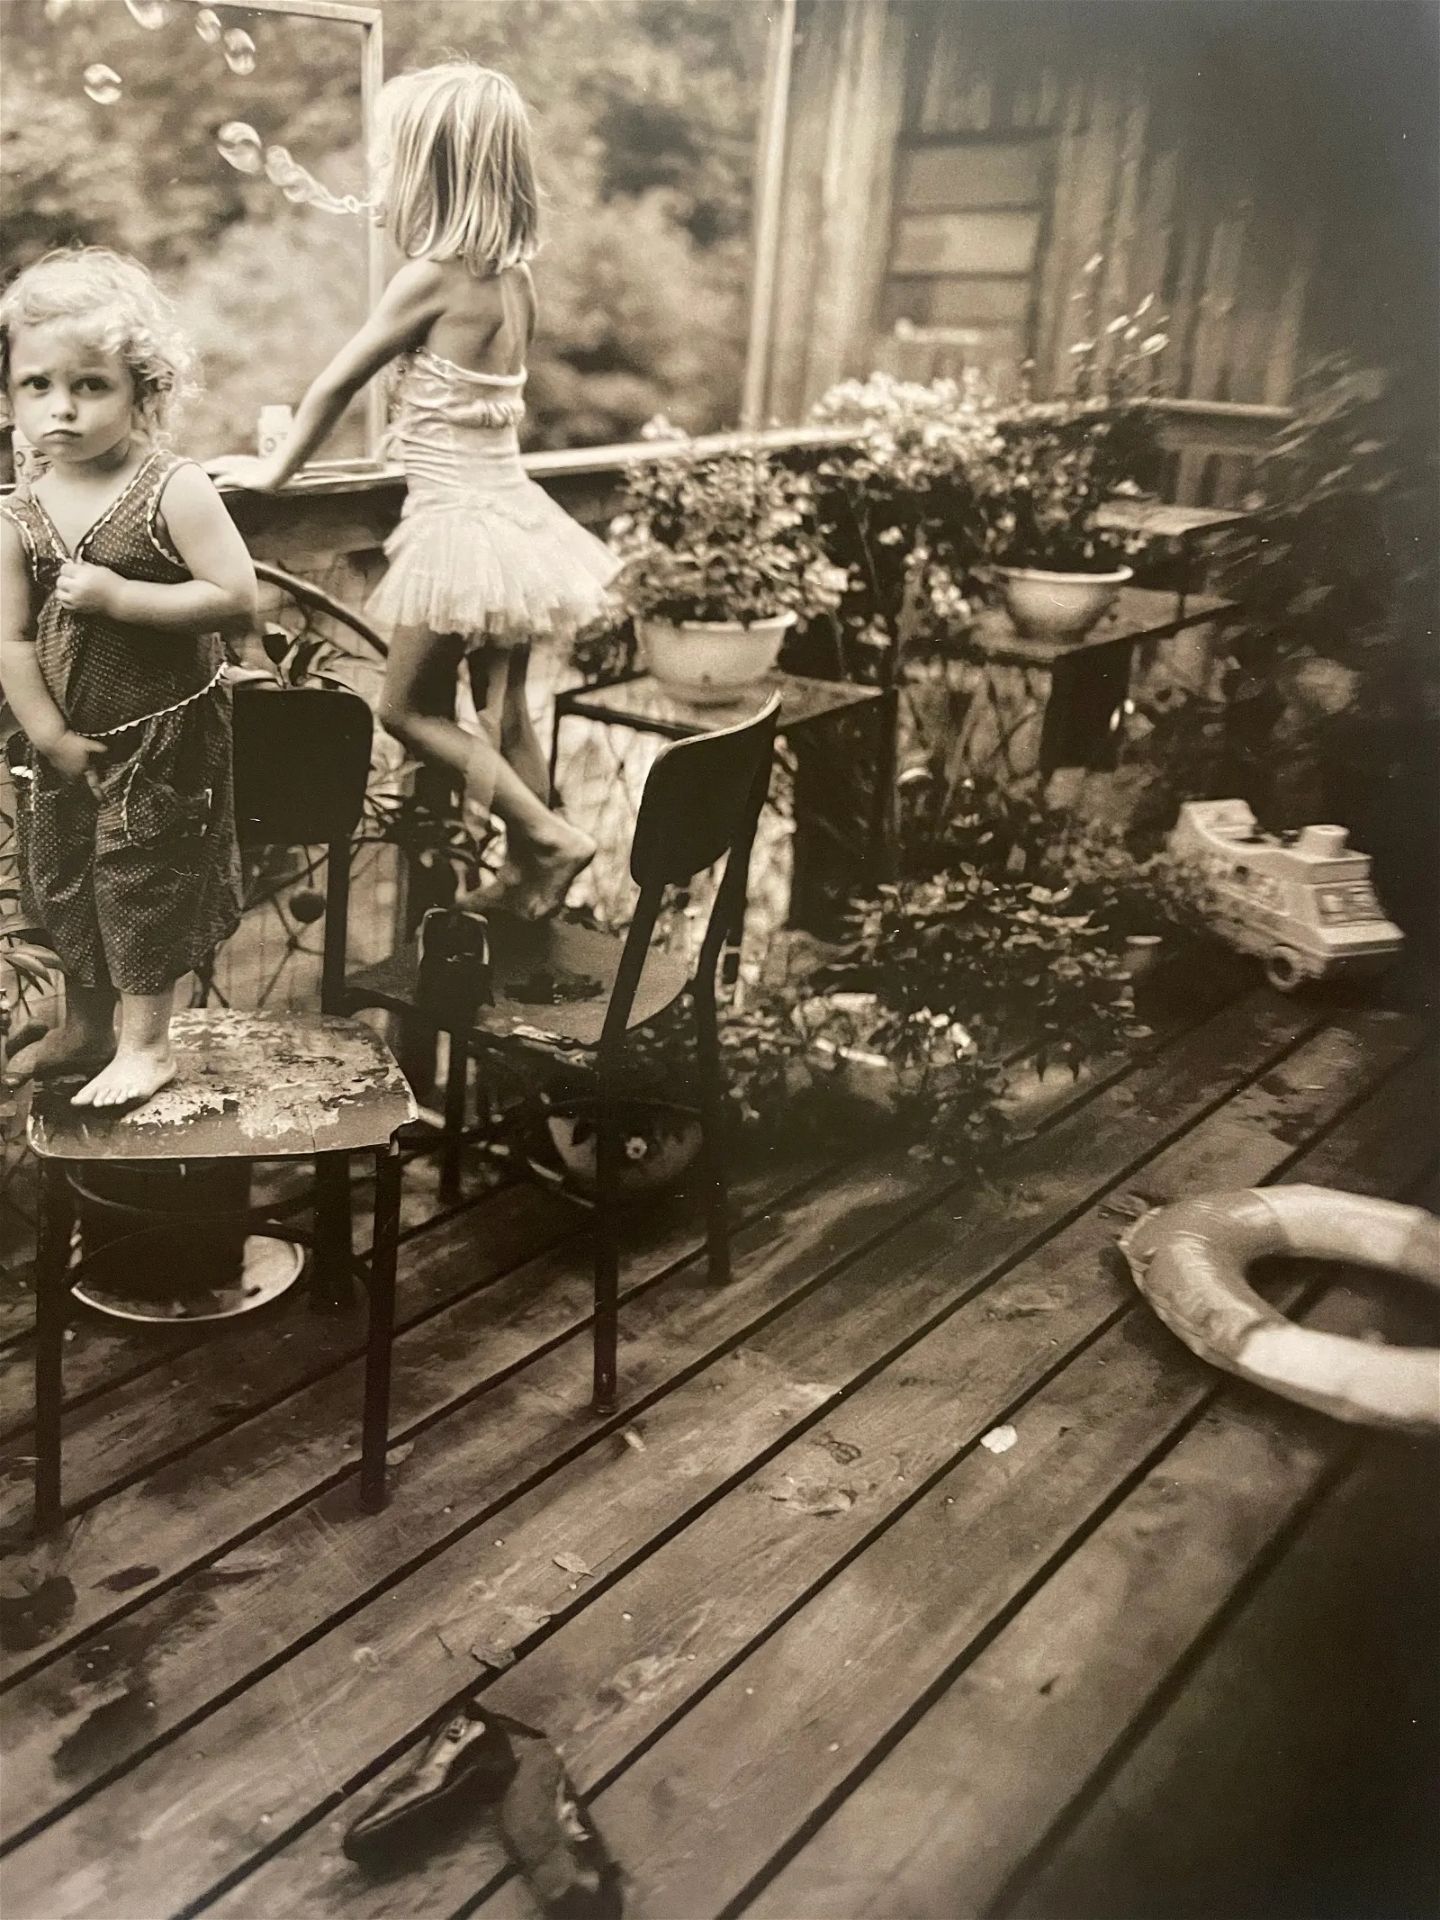 Sally Mann Signed "Blowing Bubbles, 1987" Print - Image 3 of 5